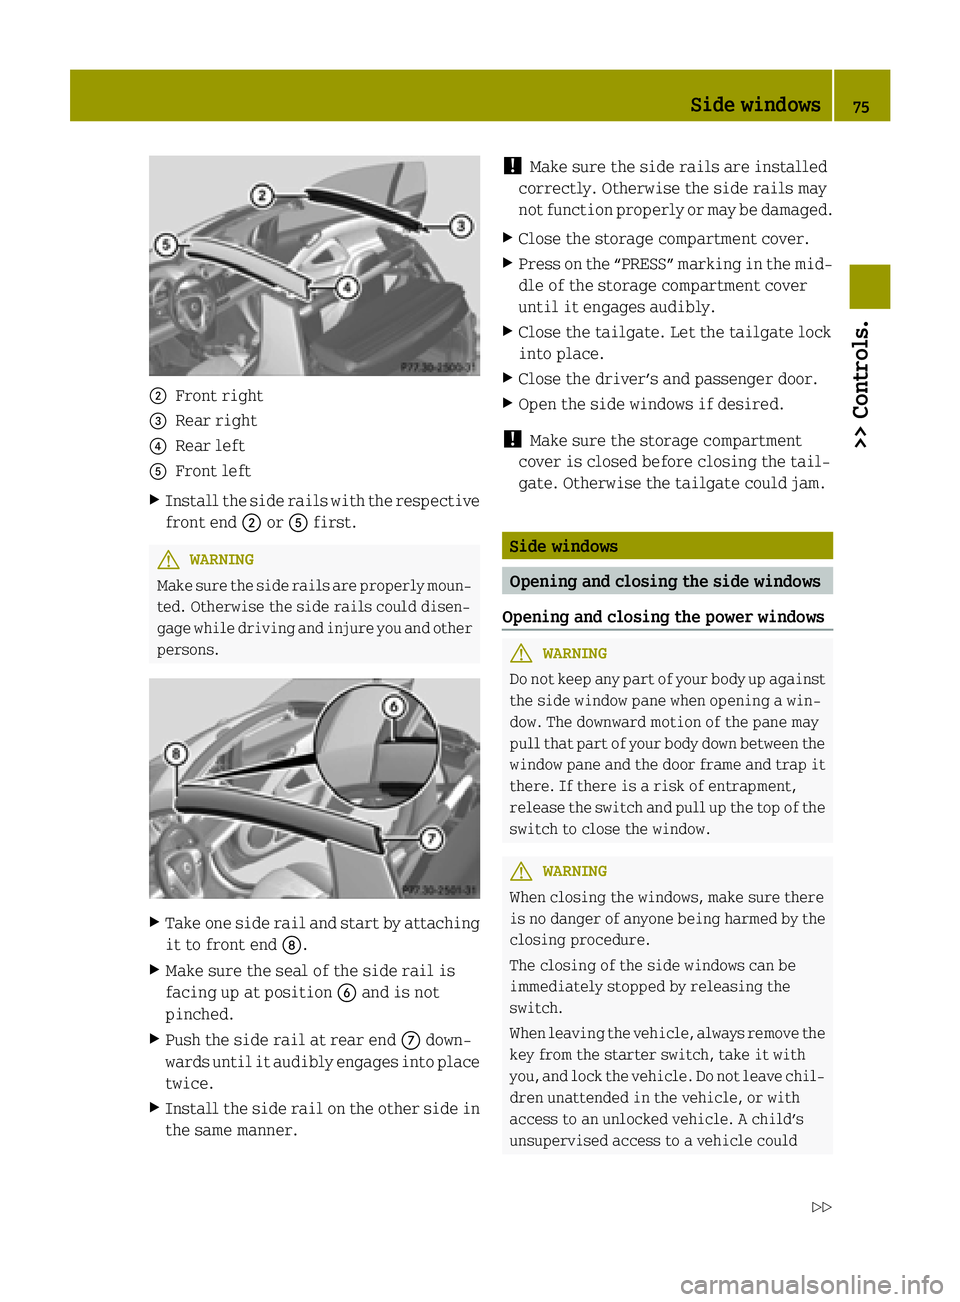 SMART FORTWO COUPE ELECTRIC DRIVE 2015 Owners Manual ;
Front right
= Rear right
? Rear left
A Front left
X Install the side rails with the respective
front end ;orA first. G
WARNING
Make sure the side rails are properly moun- ted. Otherwise the side rai